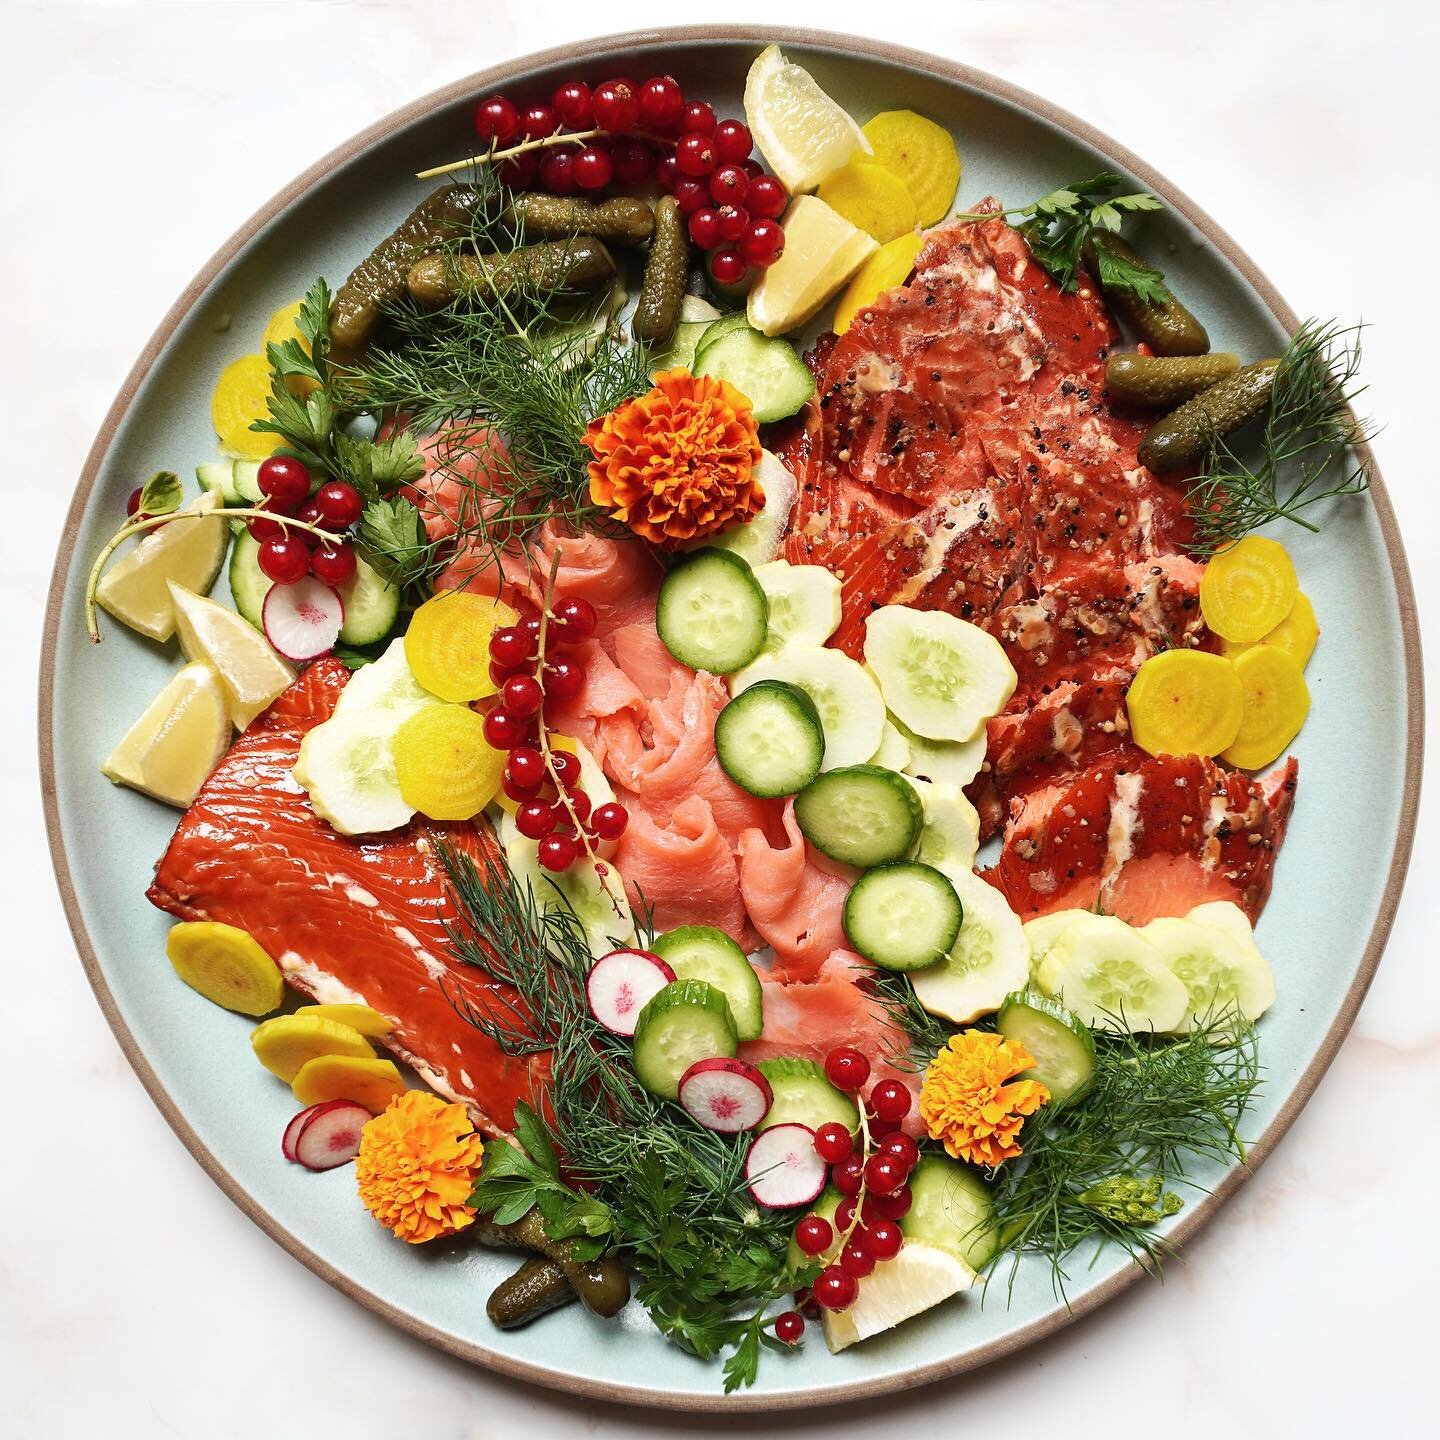 I wrote about my tradition of serving a smoked fish platter for Rosh Hashanah @jewishfood 🐟 While I truly love gefilte fish (especially homemade gefilte), after hosting many holiday dinners I realized I am often in the minority. On the other hand, #